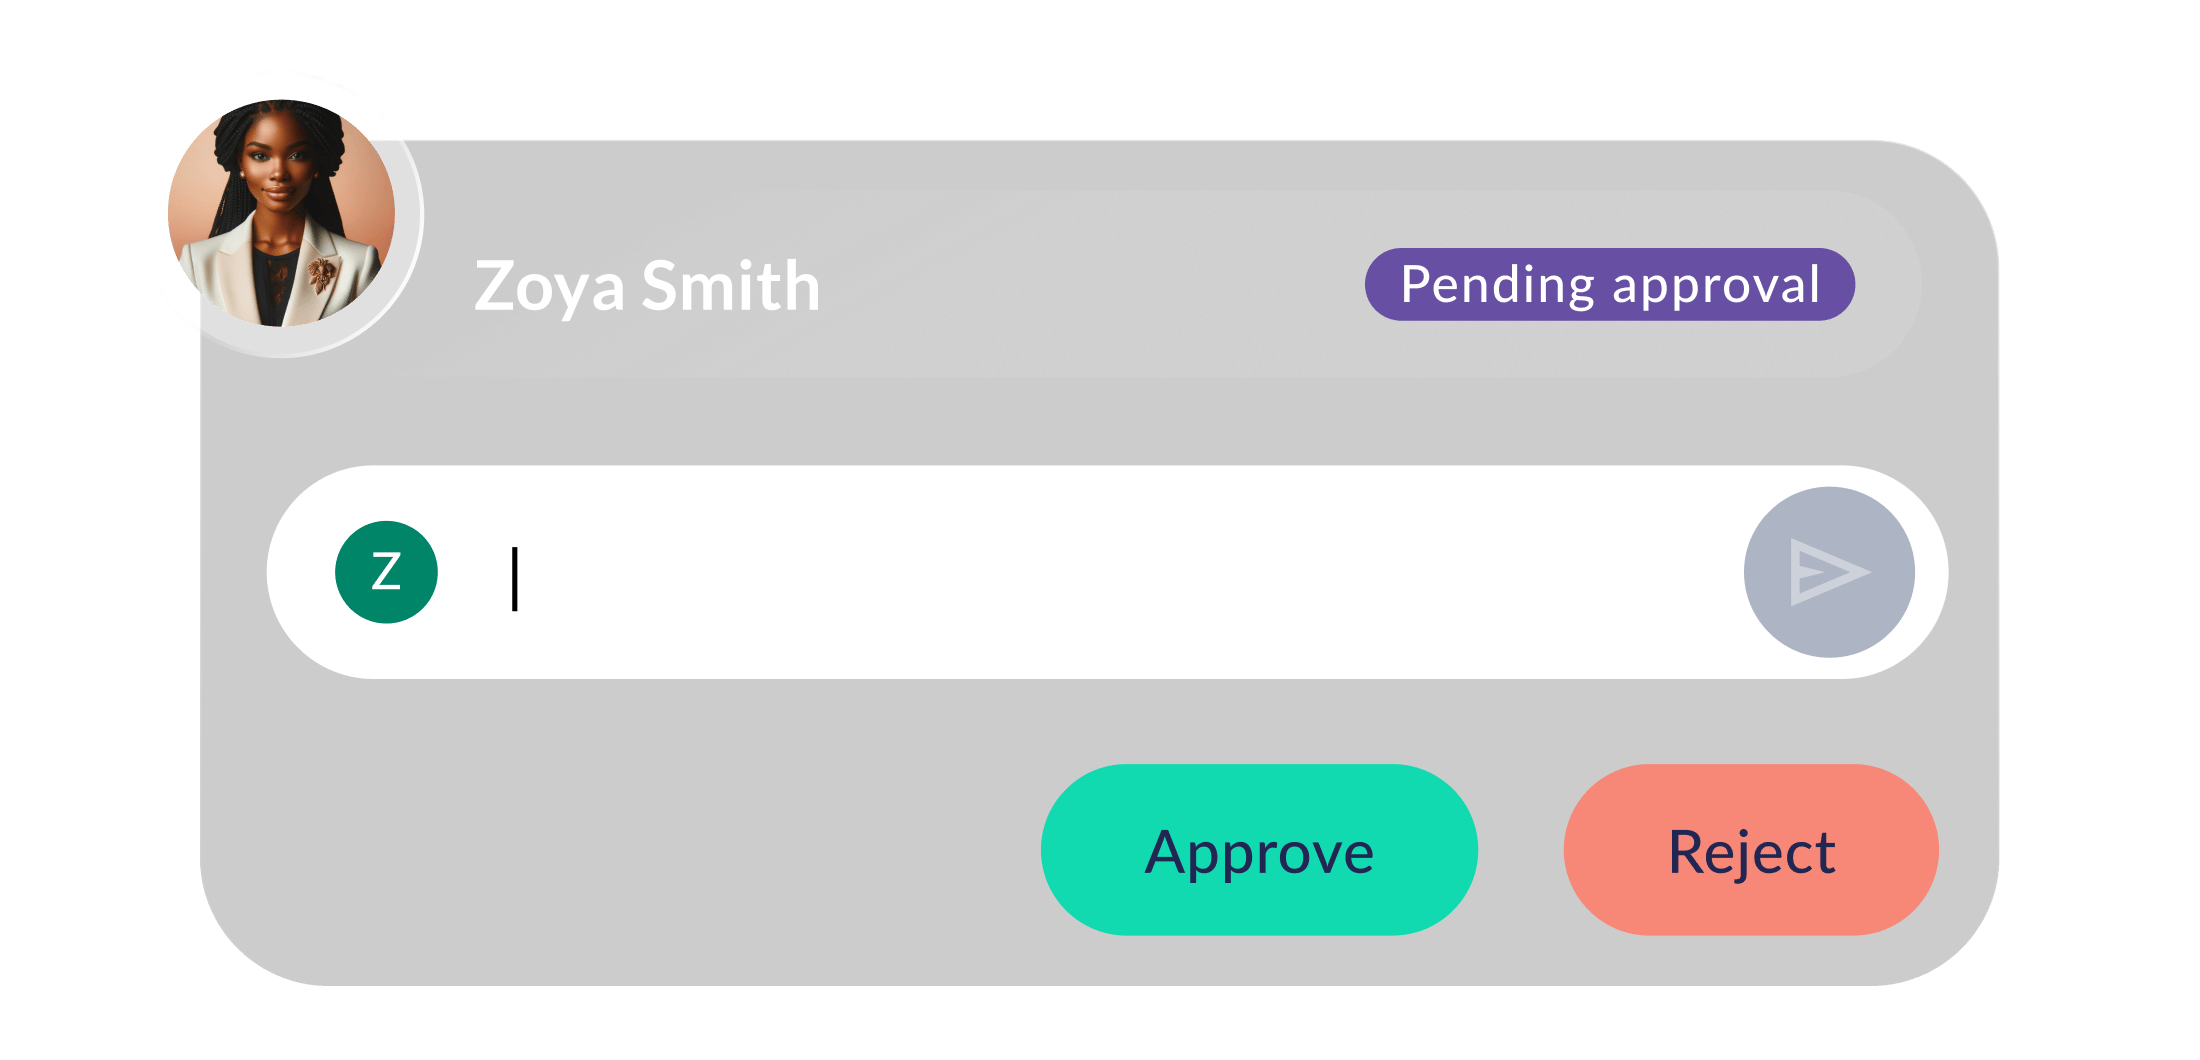 An approval textbox showing Pending approval as status and Approve and Reject buttons